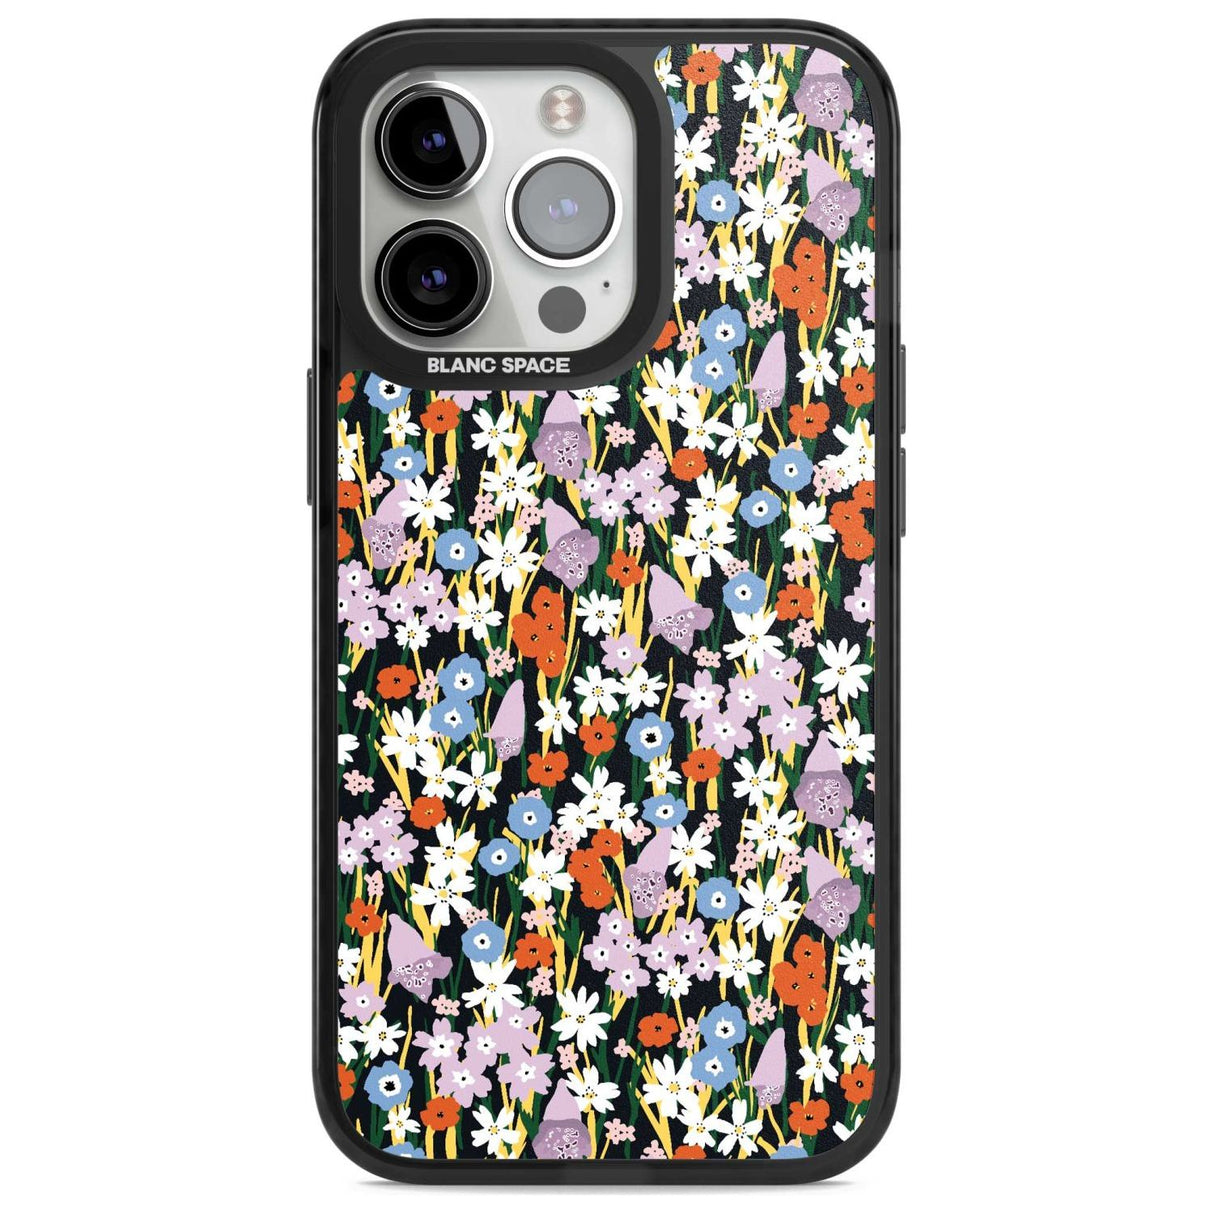 Energetic Floral Mix: Solid Phone Case iPhone 15 Pro Max / Magsafe Black Impact Case,iPhone 15 Pro / Magsafe Black Impact Case,iPhone 14 Pro Max / Magsafe Black Impact Case,iPhone 14 Pro / Magsafe Black Impact Case,iPhone 13 Pro / Magsafe Black Impact Case Blanc Space